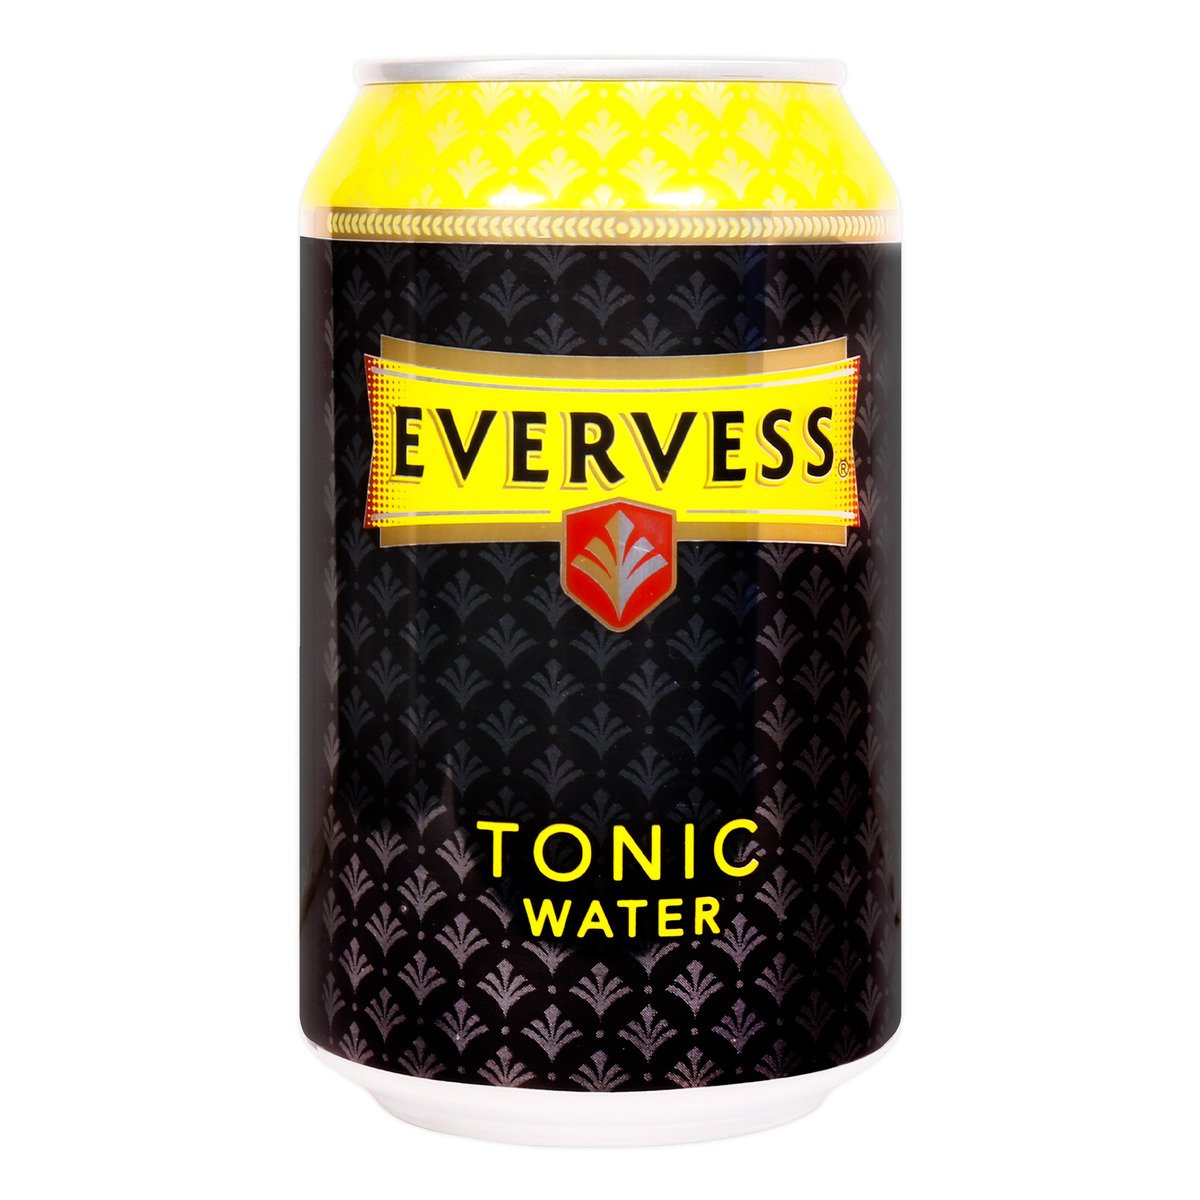 Evervess Tonic Water Can 6 x 330ml